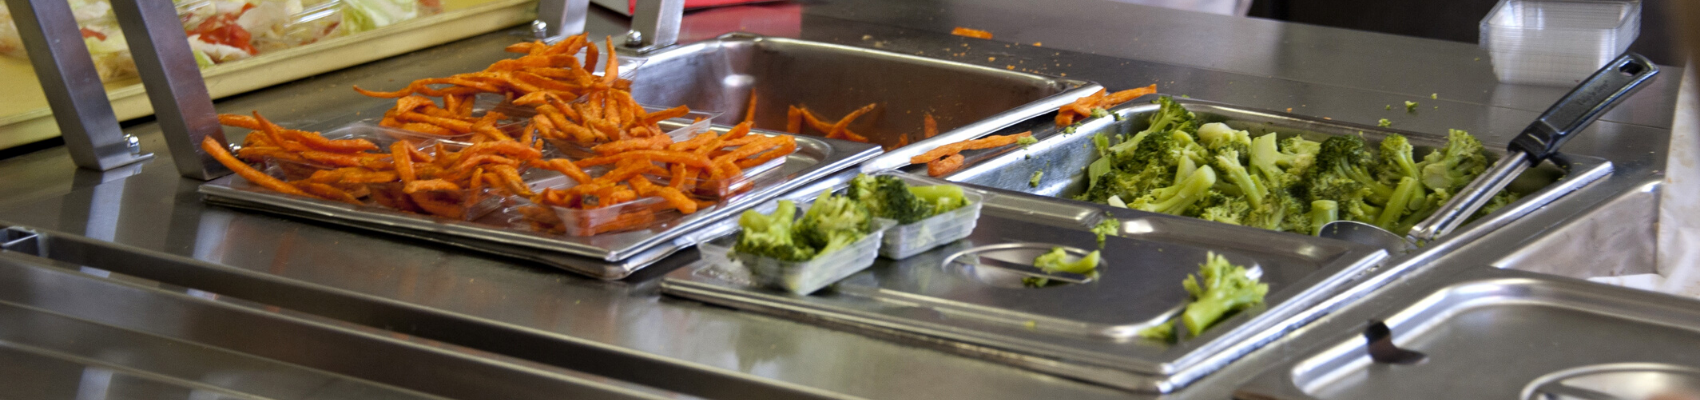 cafeteria line with broccoli  and sweet potatoes 